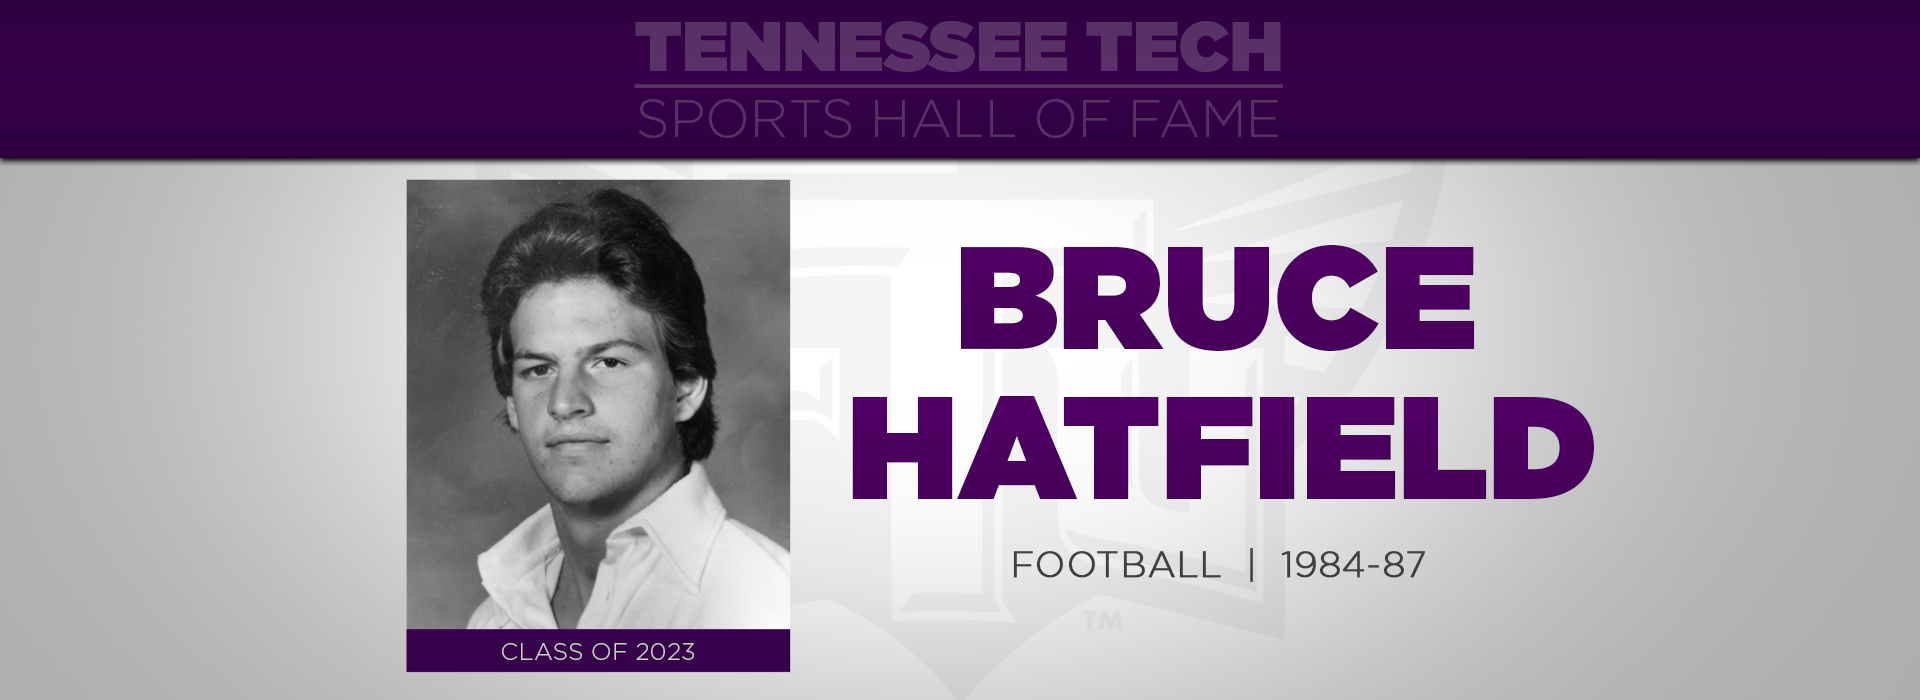 Hatfield to be inducted into TTU Sports Hall of Fame Friday, Nov. 3